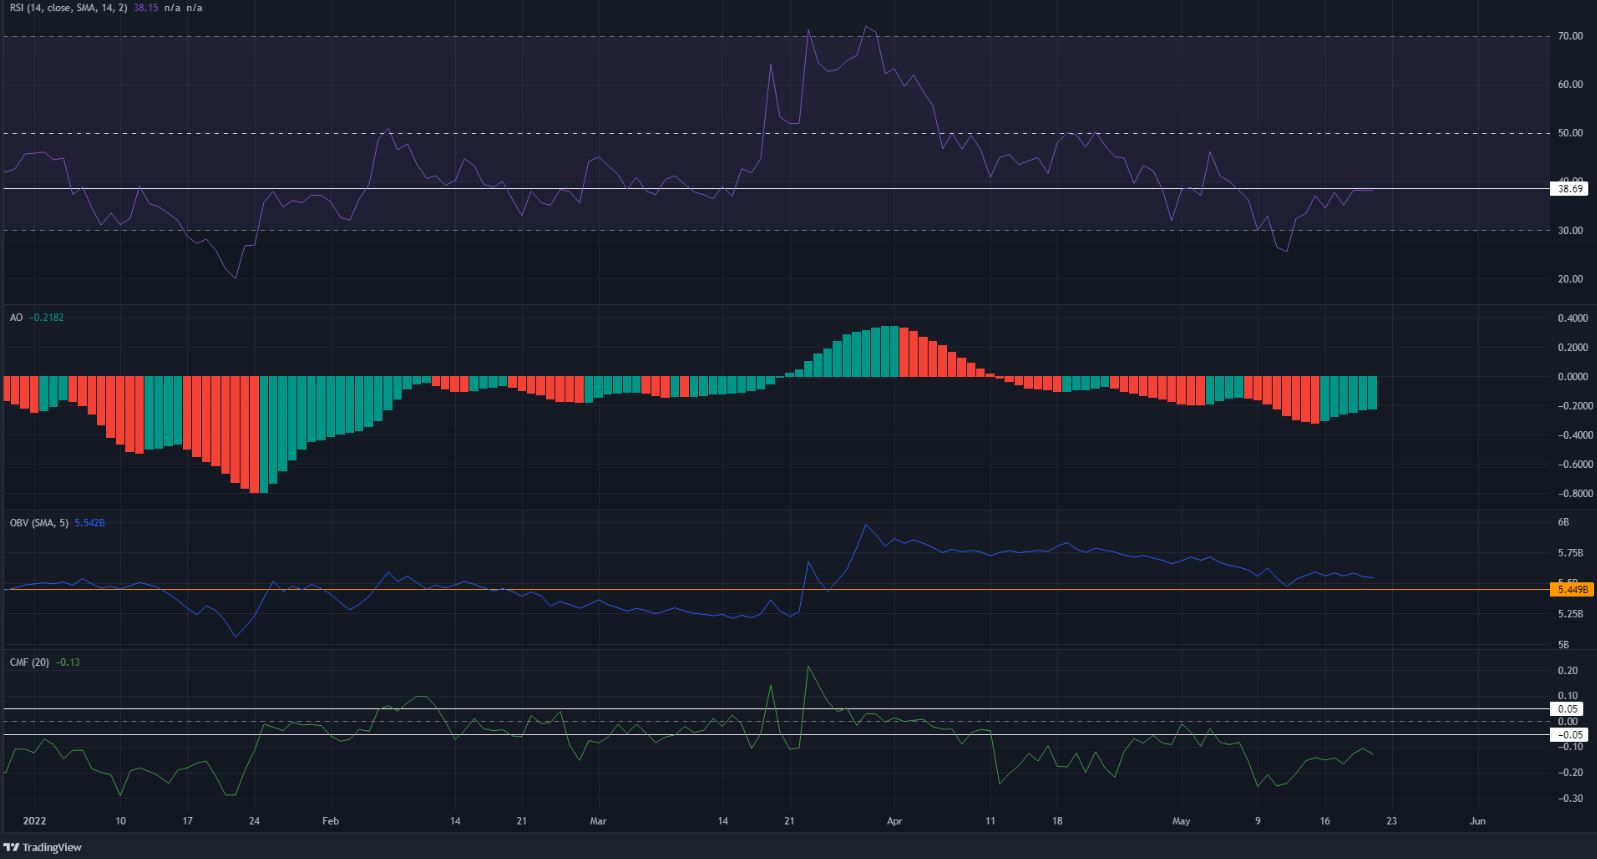 Loopring: LRC bulls looking to defend a crucial support area, but sellers remain strong